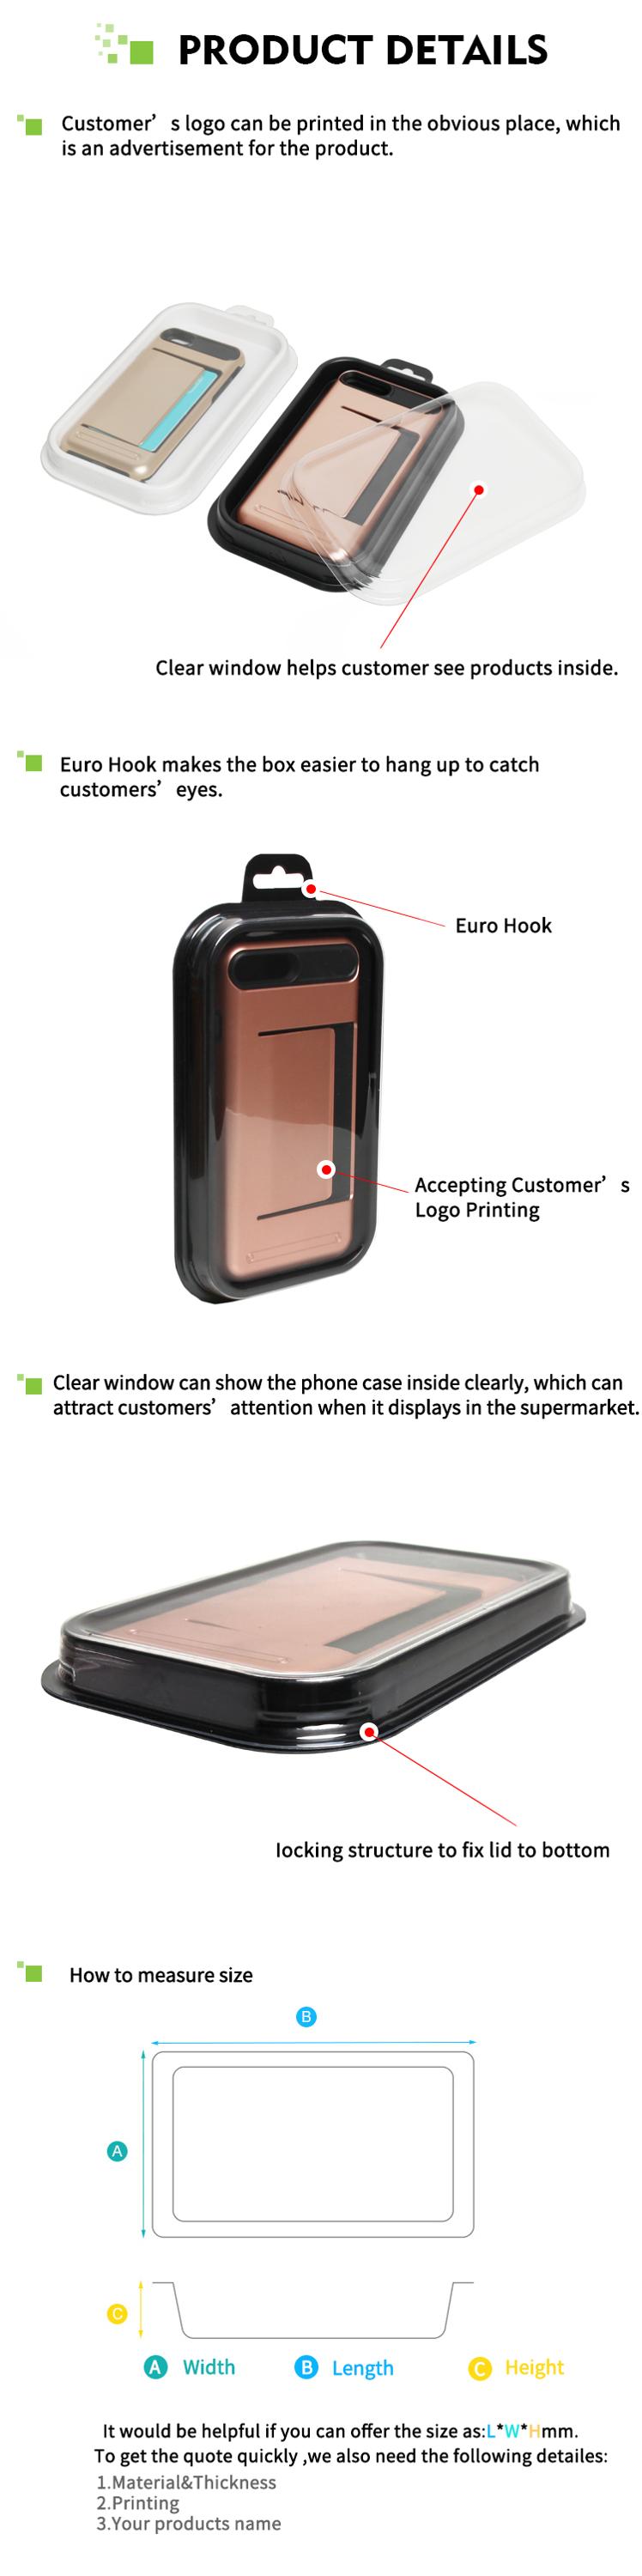 Mobile Phone Case Packaging Box